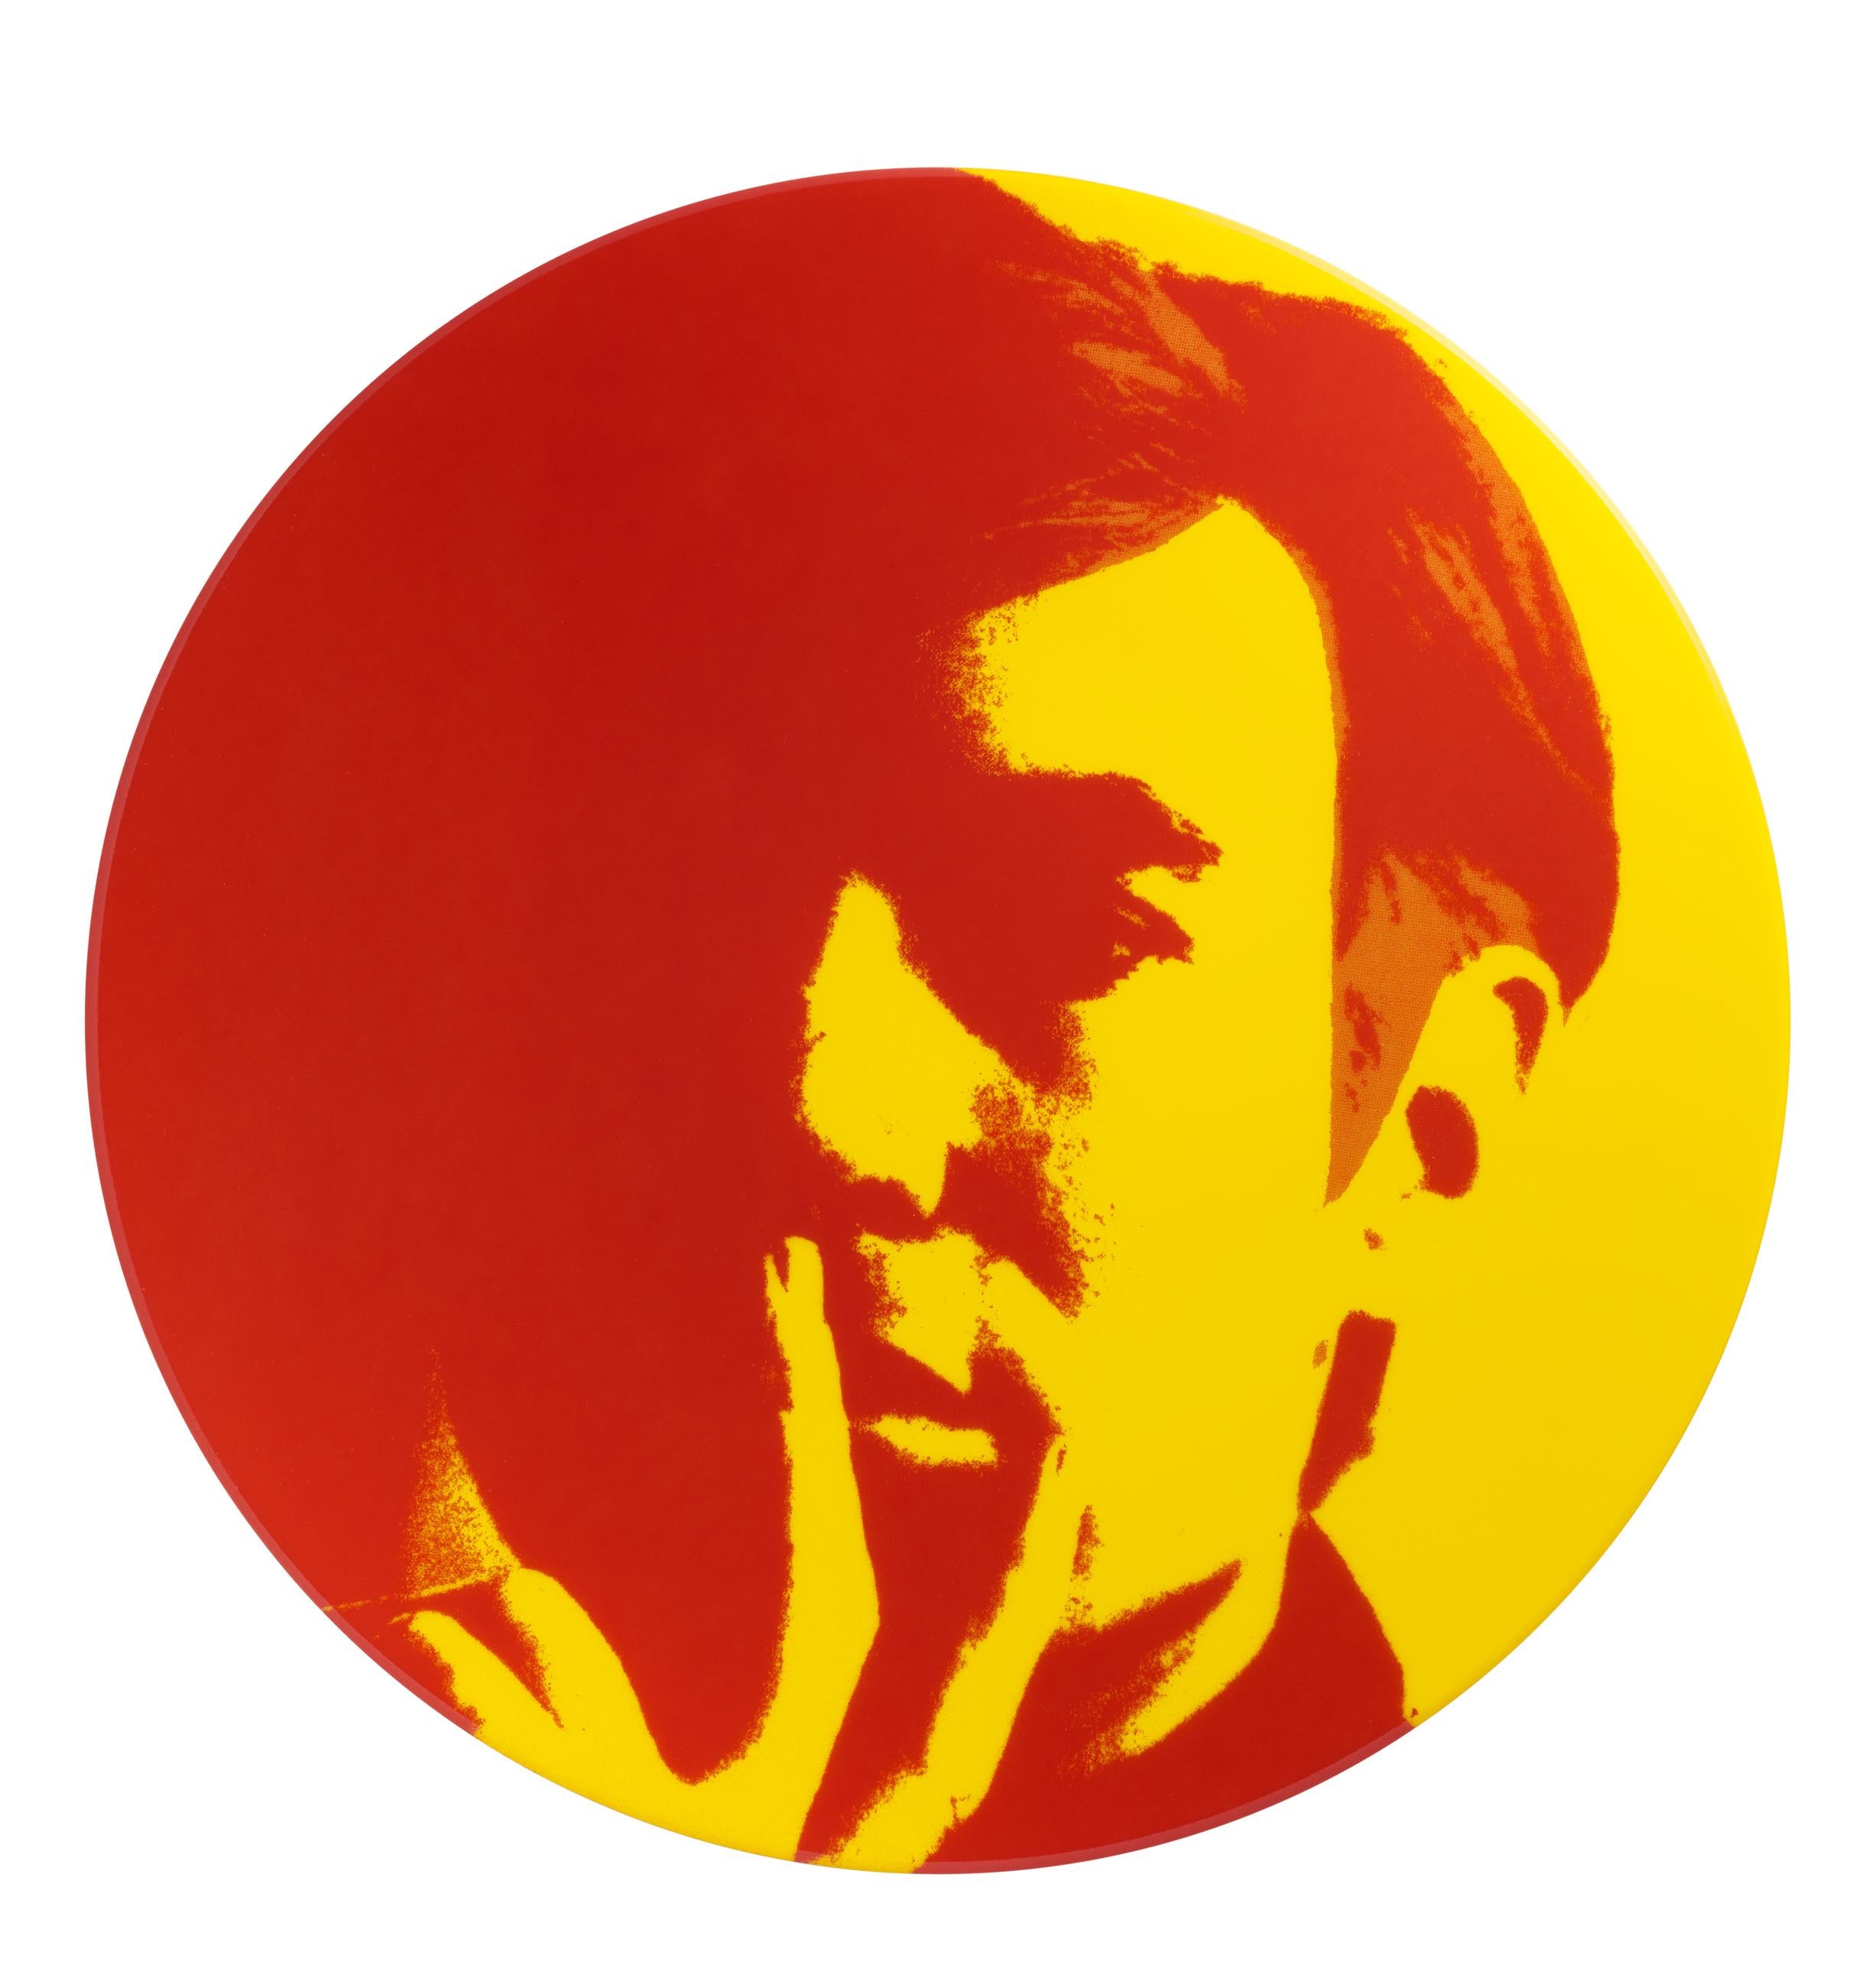 North American Self Portrait Plate, 'Red/Yellow', After Andy Warhol